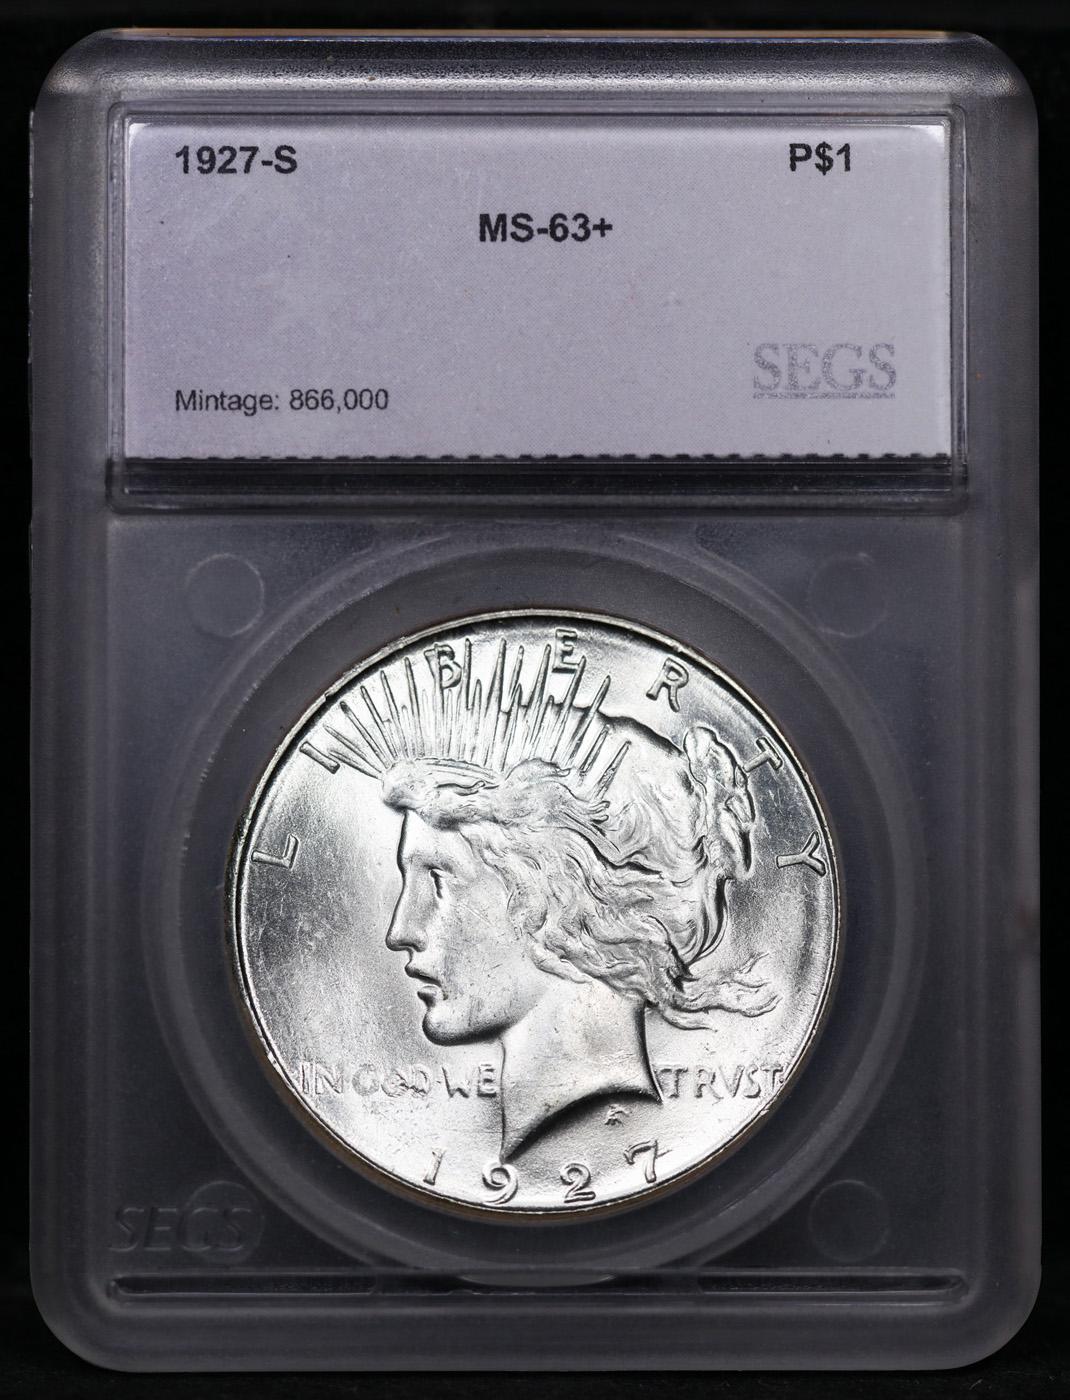 ***Auction Highlight*** 1927-s Peace Dollar $1 Graded ms63+ By SEGS (fc)